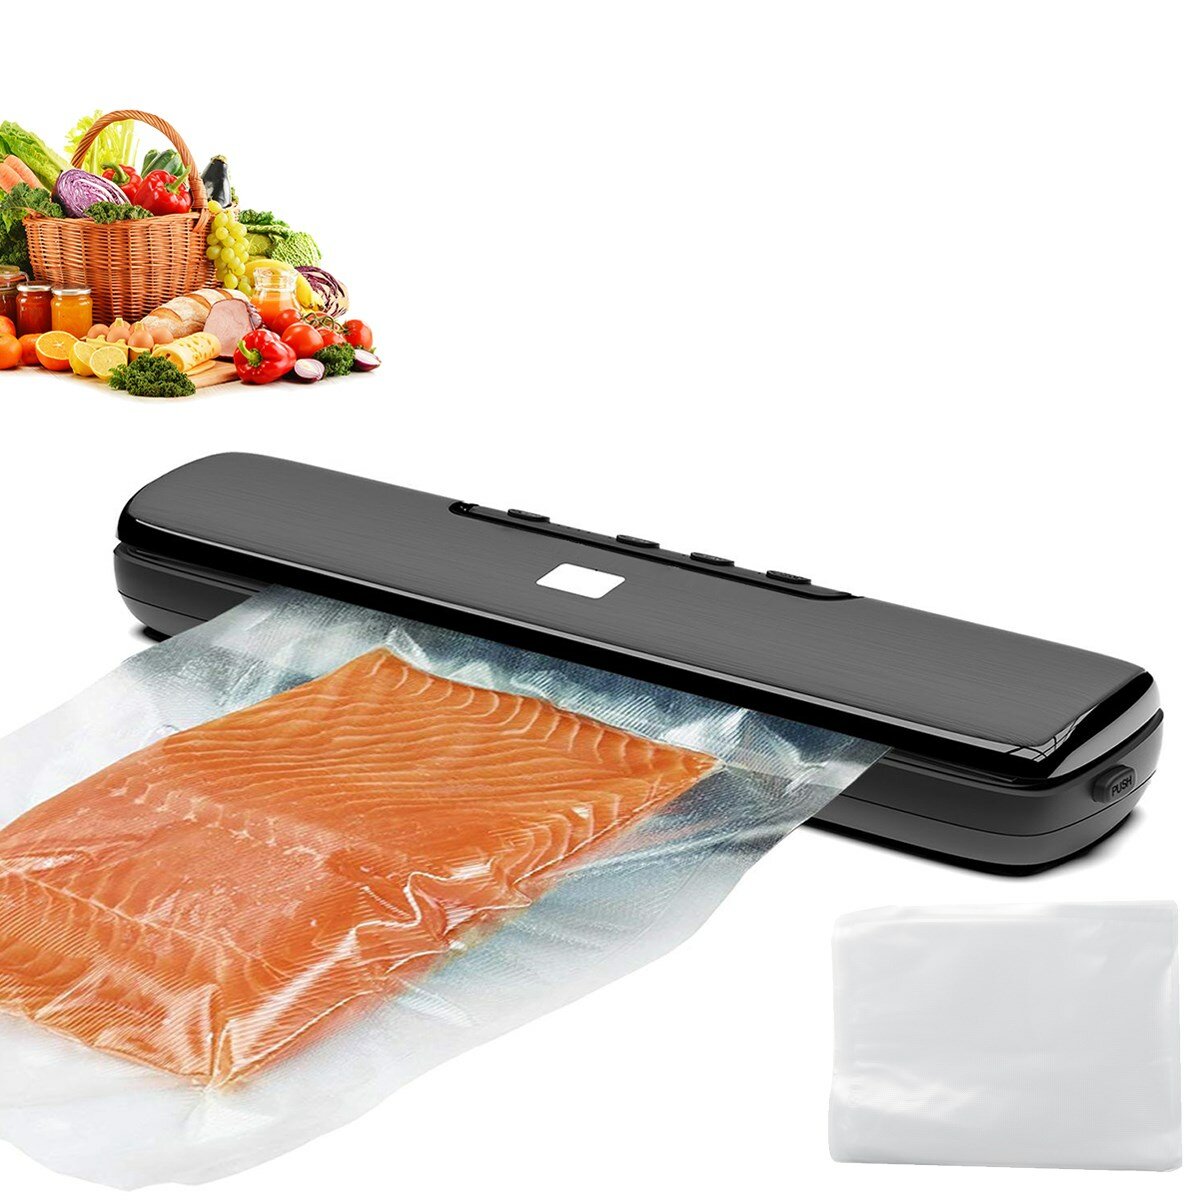 220V New Vacuum Packing Machine Commercial Household Food Vacuum Sealer Film Sealer Vacuum Packer In